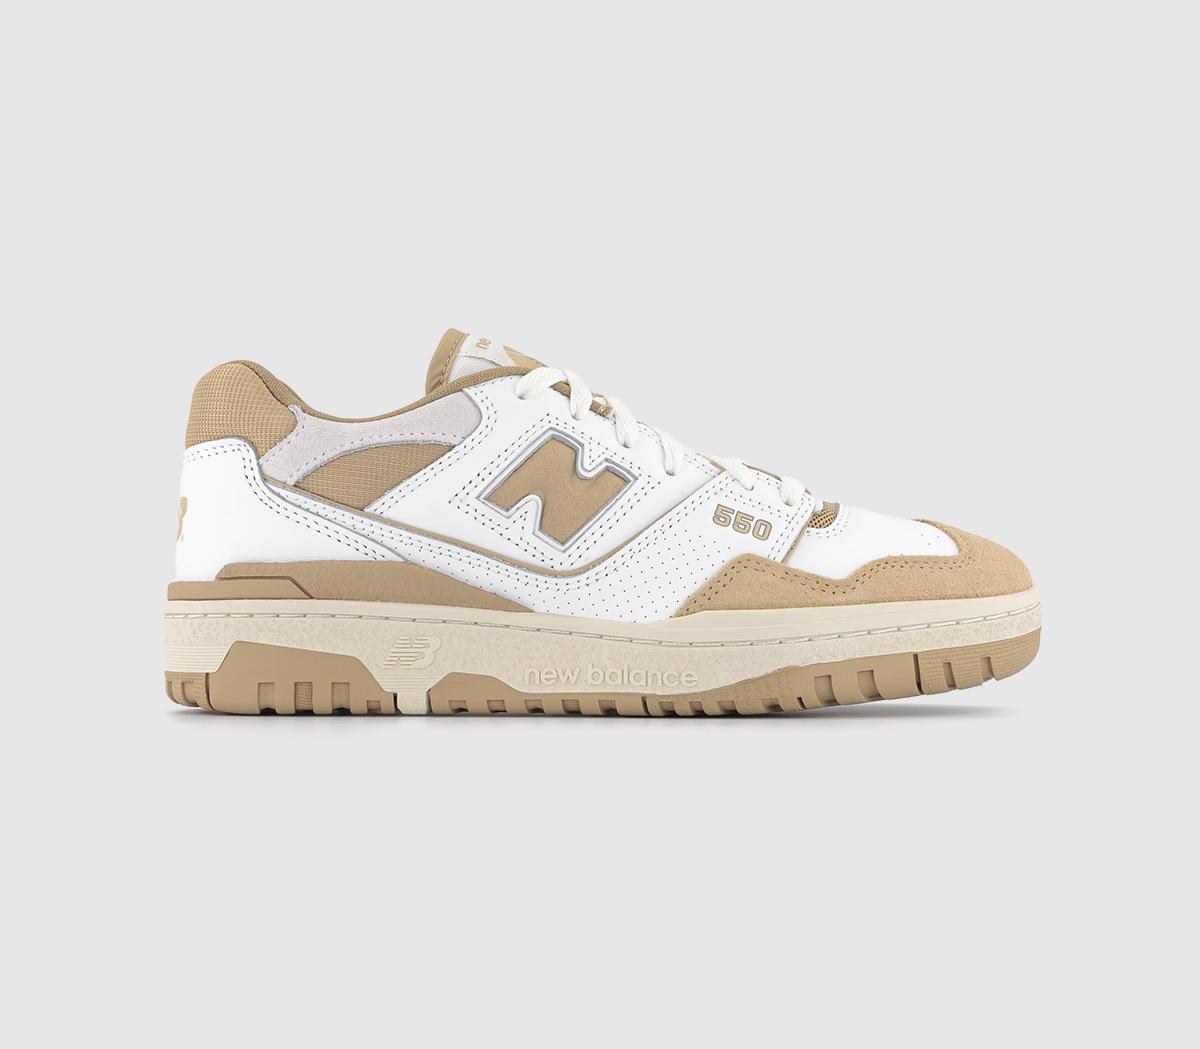 Womens New Balance BB550 White Sand Offwhite Trainers